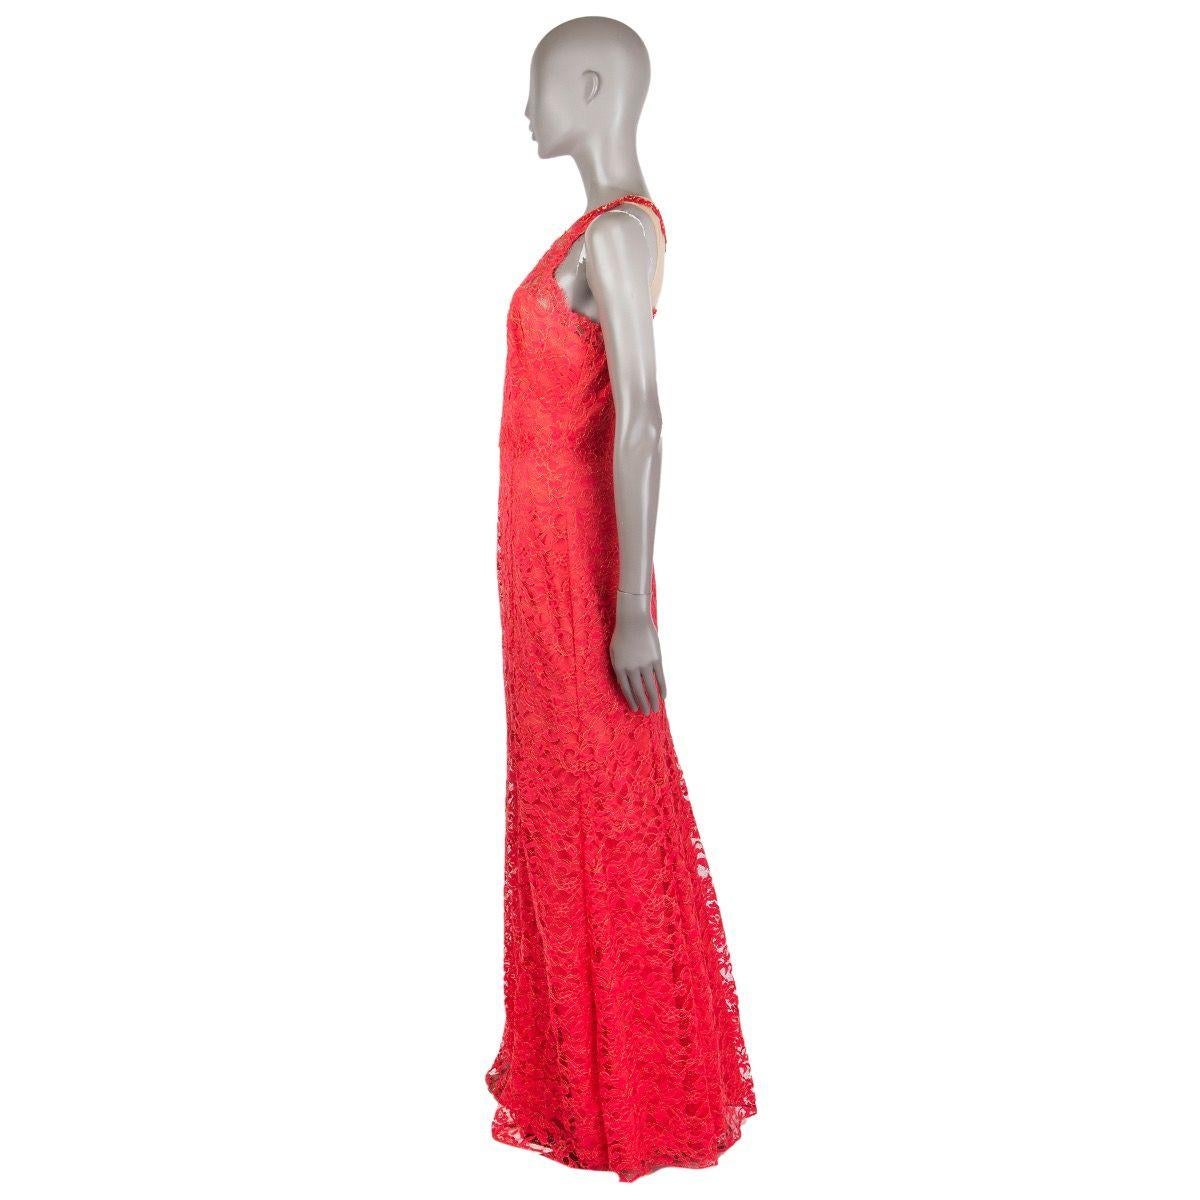 100% authentic Marchesa 'Notte' sleeveless lace evening gown in coral and gold nylon (80%) and metallic fiber (20%) with a  jewel neck. Closes on the back with a concealed zipper. Lined in polyester (97%) and spandex (3%). Brand